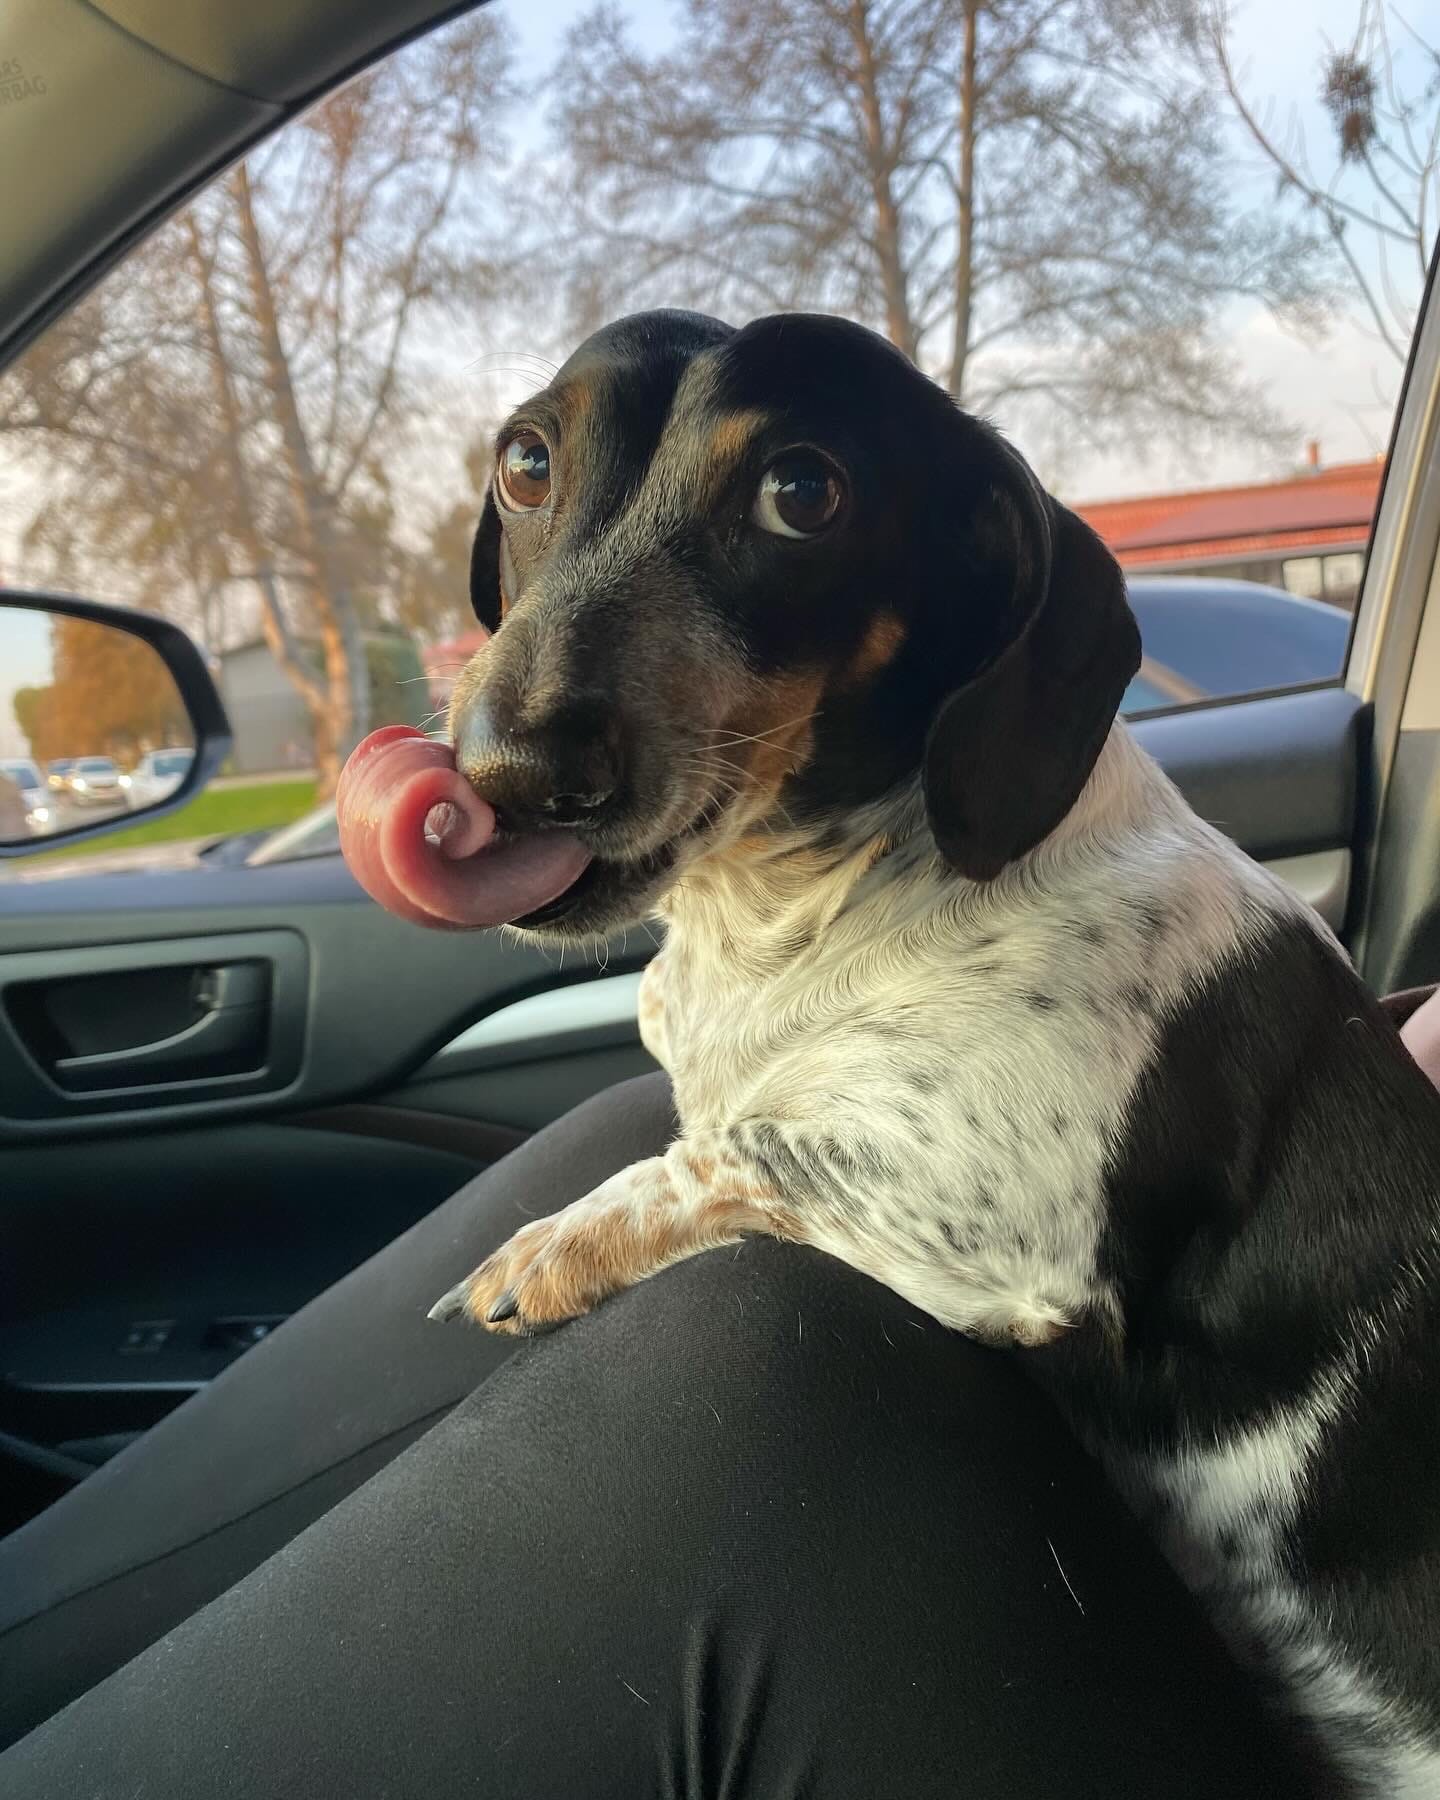 DOGFLUENCERS: Meet Benny, Instagram's Cutest Spotted Dachshund